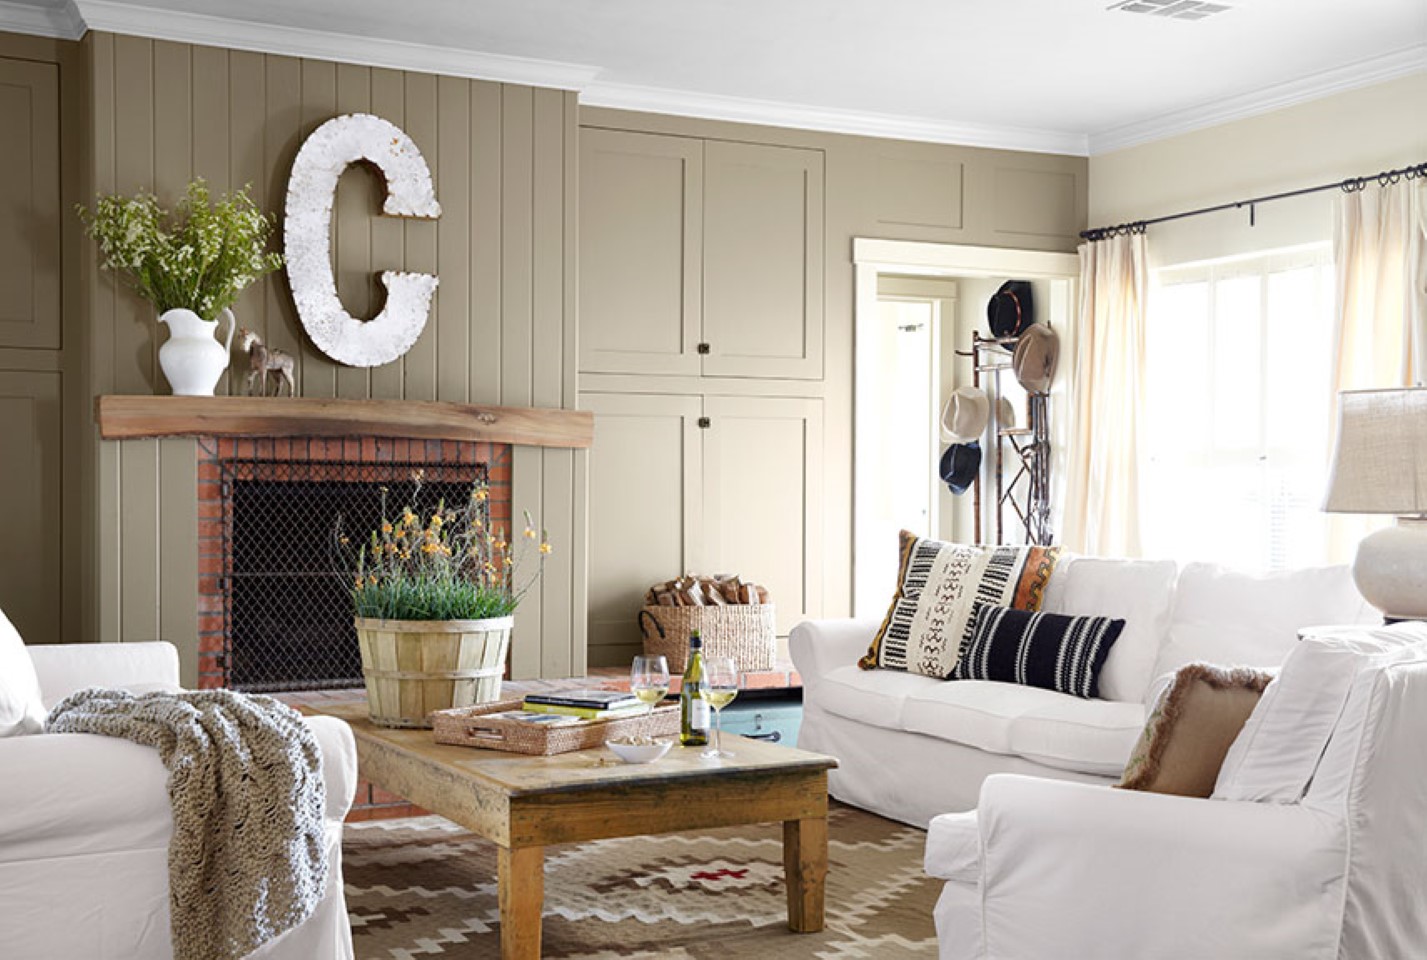 Country Living C Rustic Country Living Room With C Letter Display And White Sofa Slipcover Idea Feat Creative Brick Fireplace Mantel Living Room  Country Living Room Appears Appealing Interior 